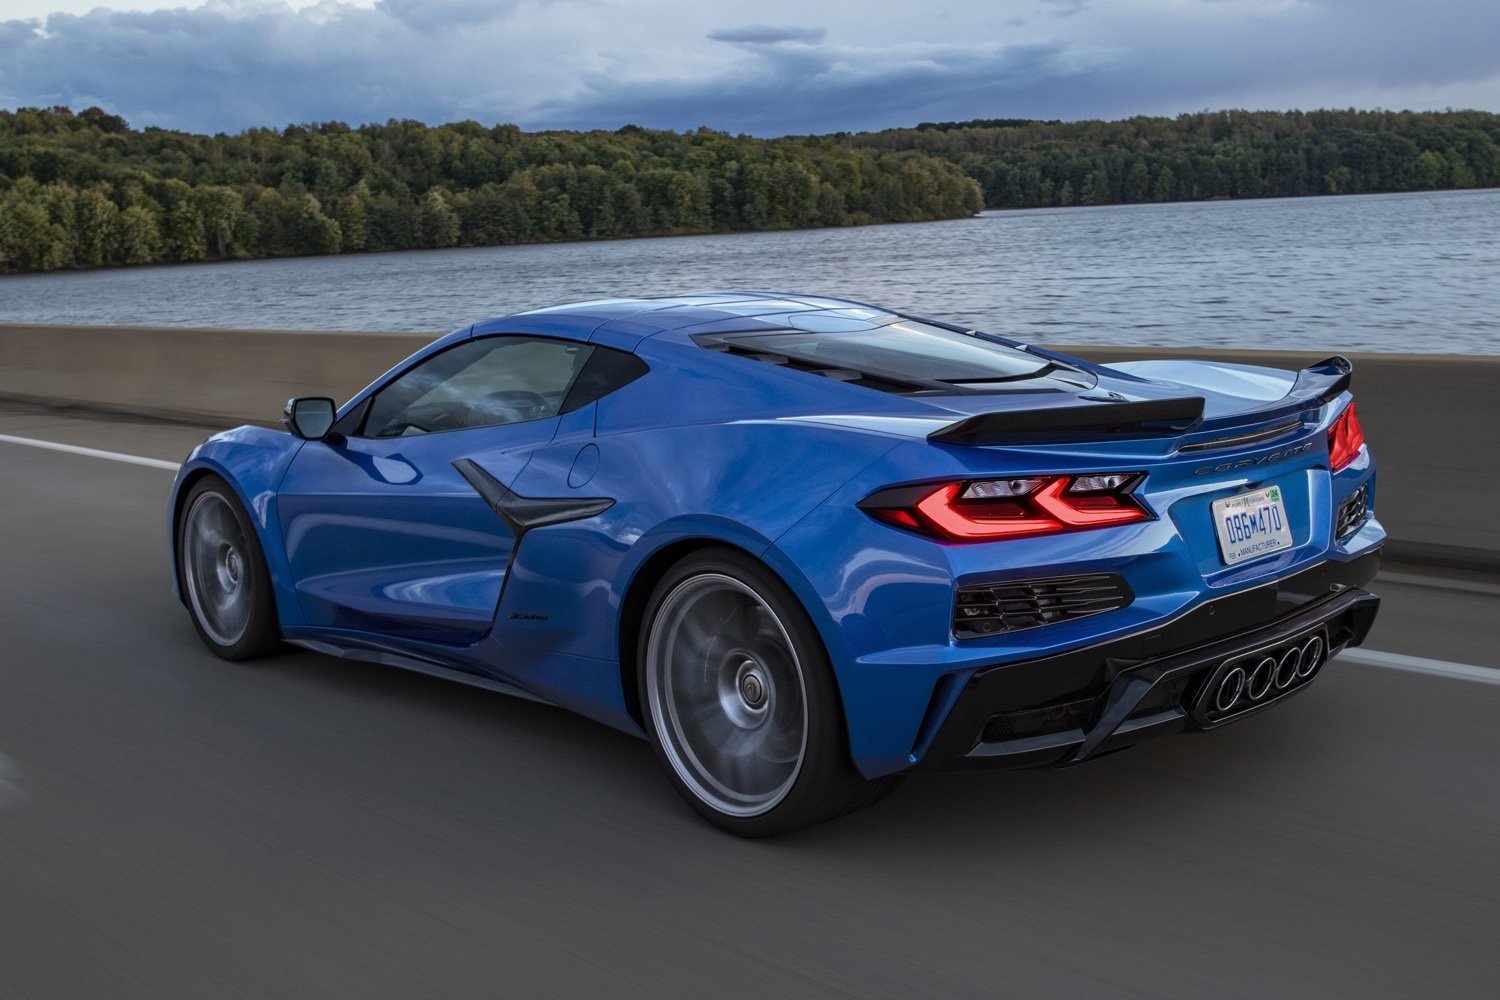 Rick Hendrick paid $3.6 million at auction for a 2023 Corvette Z06 similar to this model.